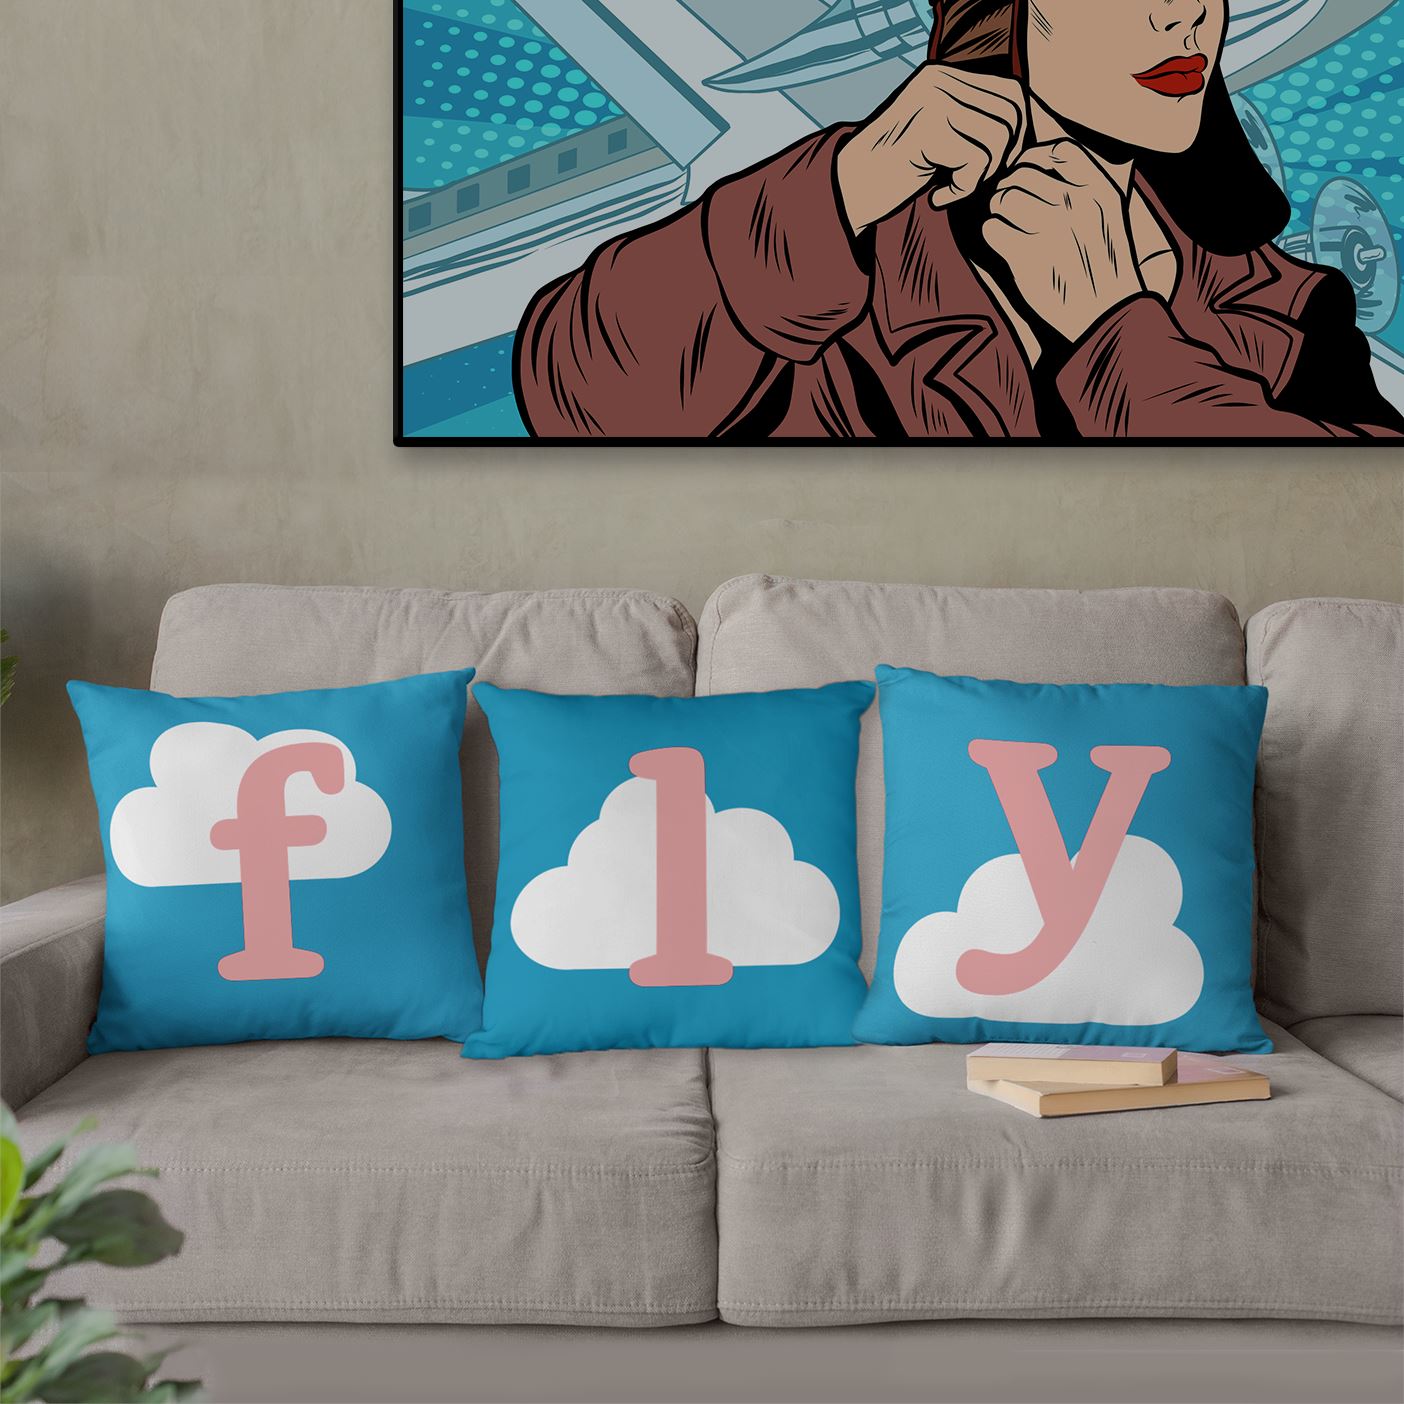 The "y" in FLY | Suede Feel Square Pillow (pink) Home Decor for women in aviation